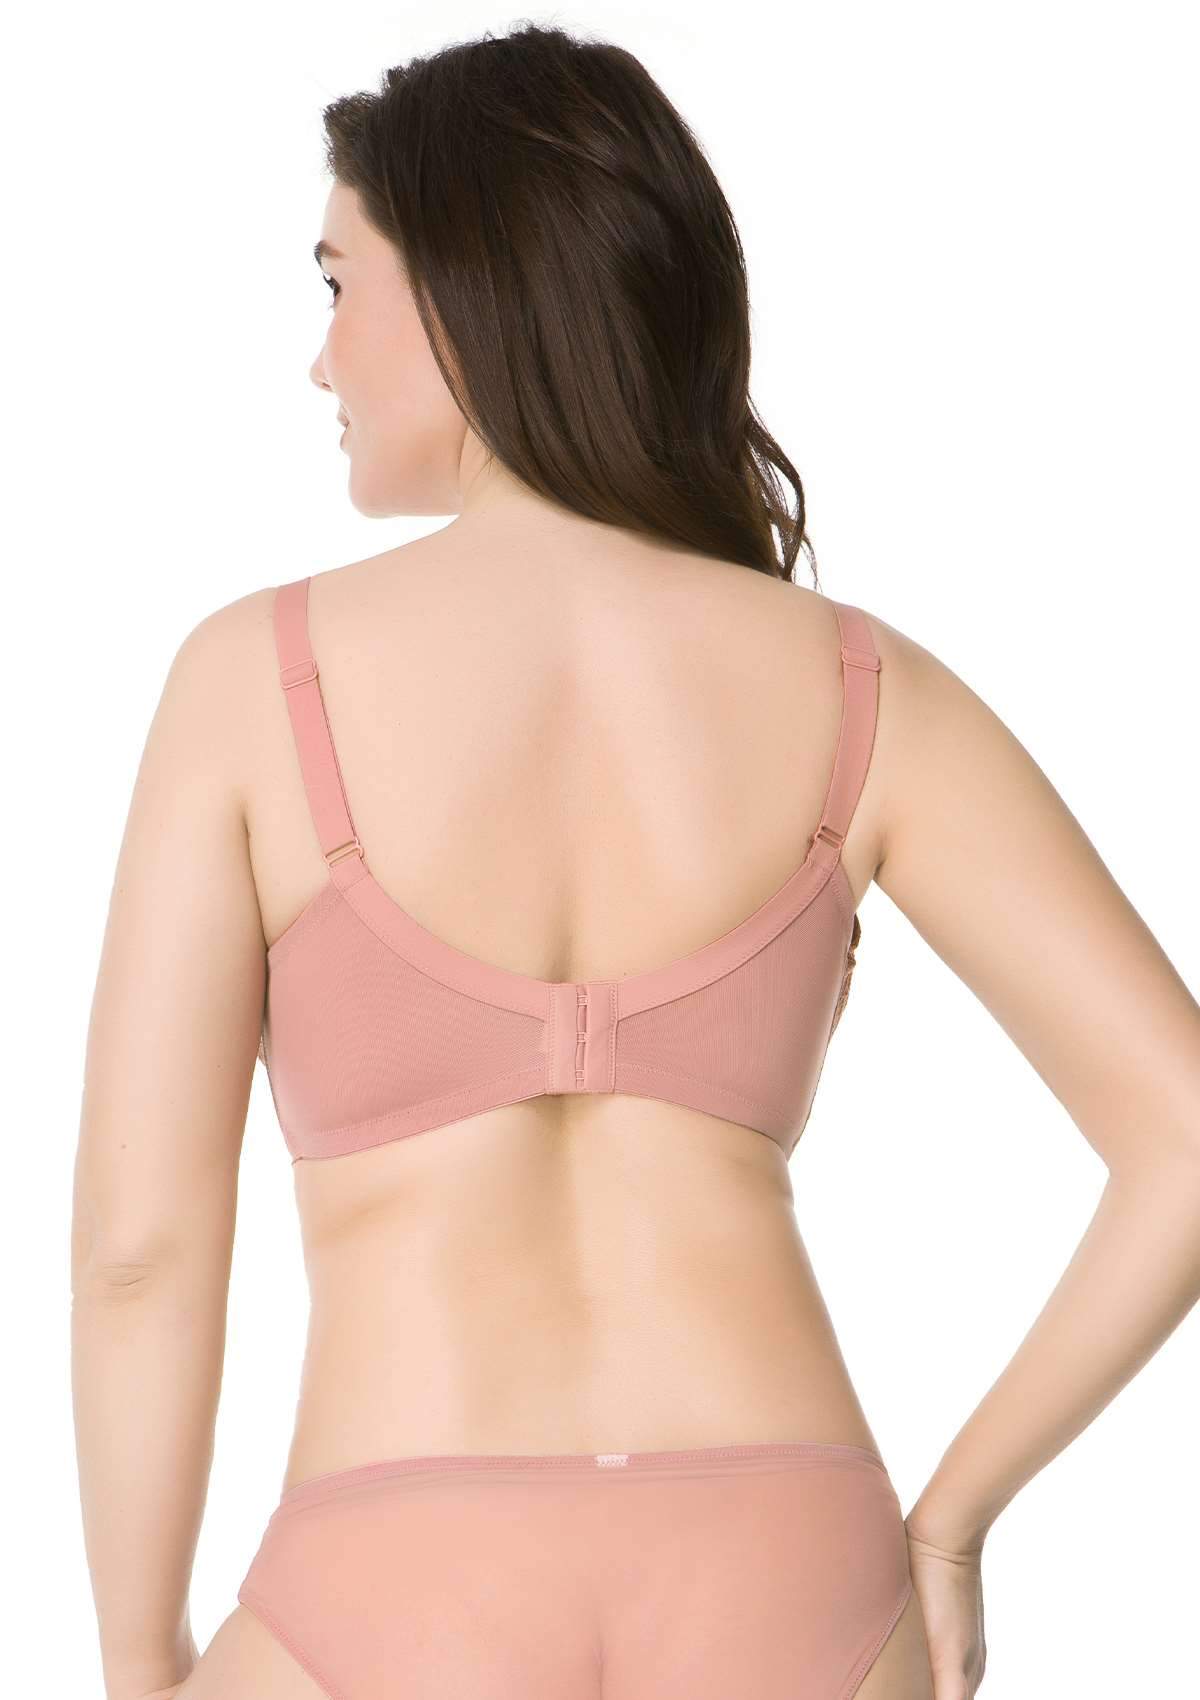 HSIA Peony Lace Unlined Supportive Underwire Bra - Light Coral / 34 / C